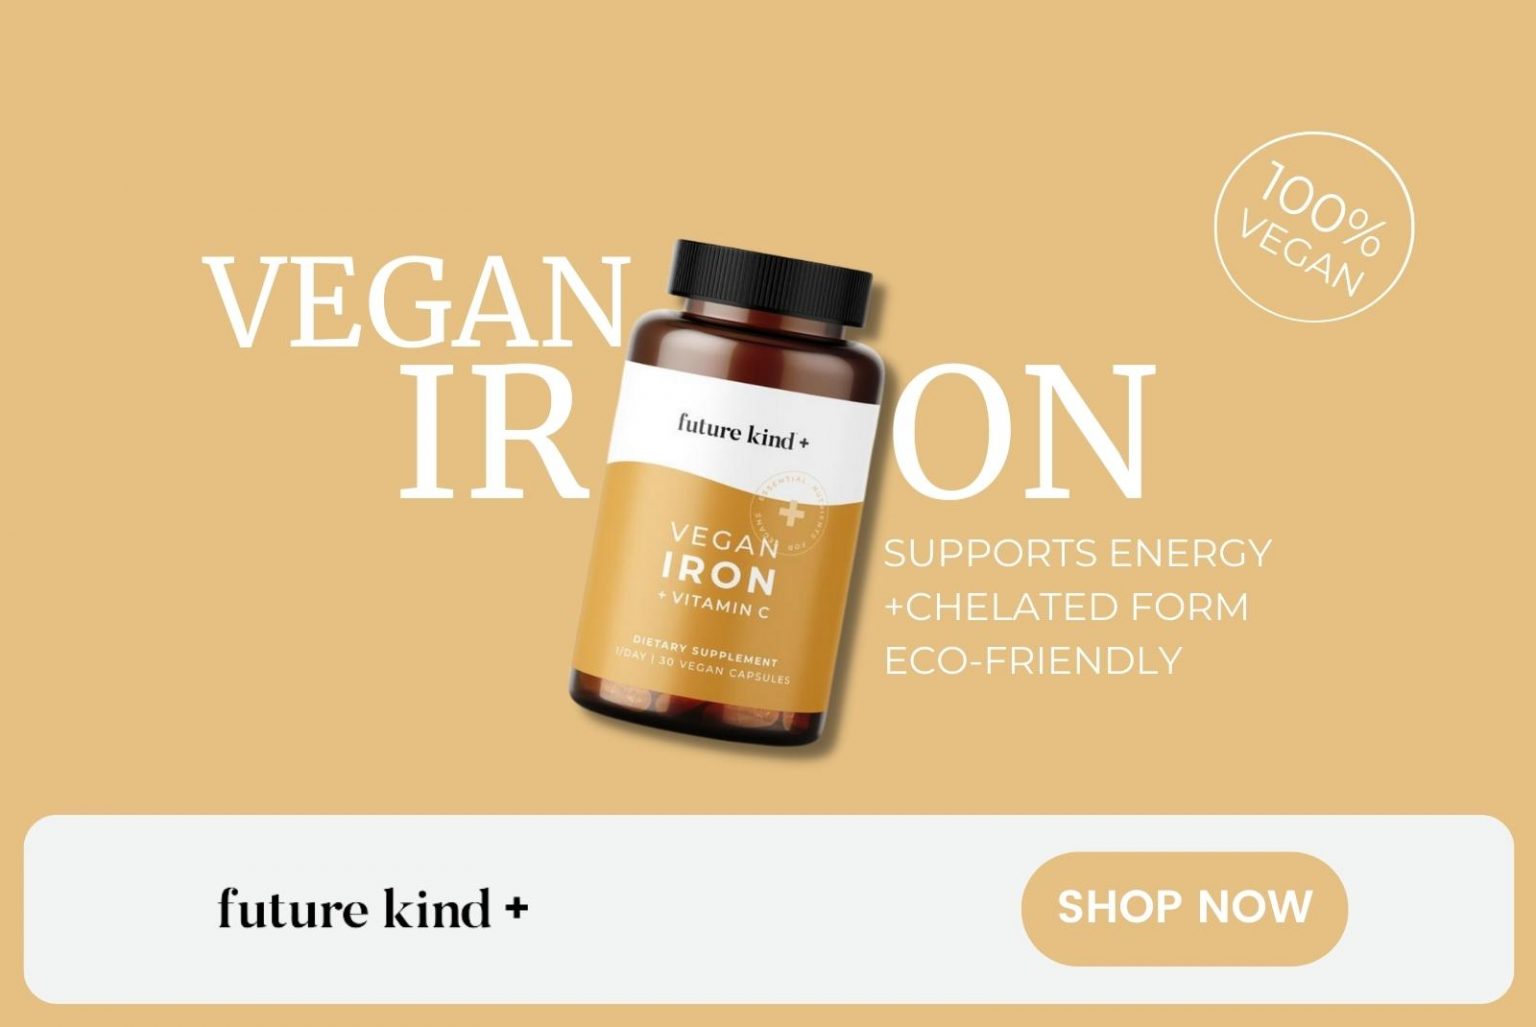 Up to 30% of people worldwide are impacted by an Iron deficiency. Future kind+ vitamin uses ferrous bisglycinate iron for increased absorption, combined with a wholefood vitamin C made from acerola cherry